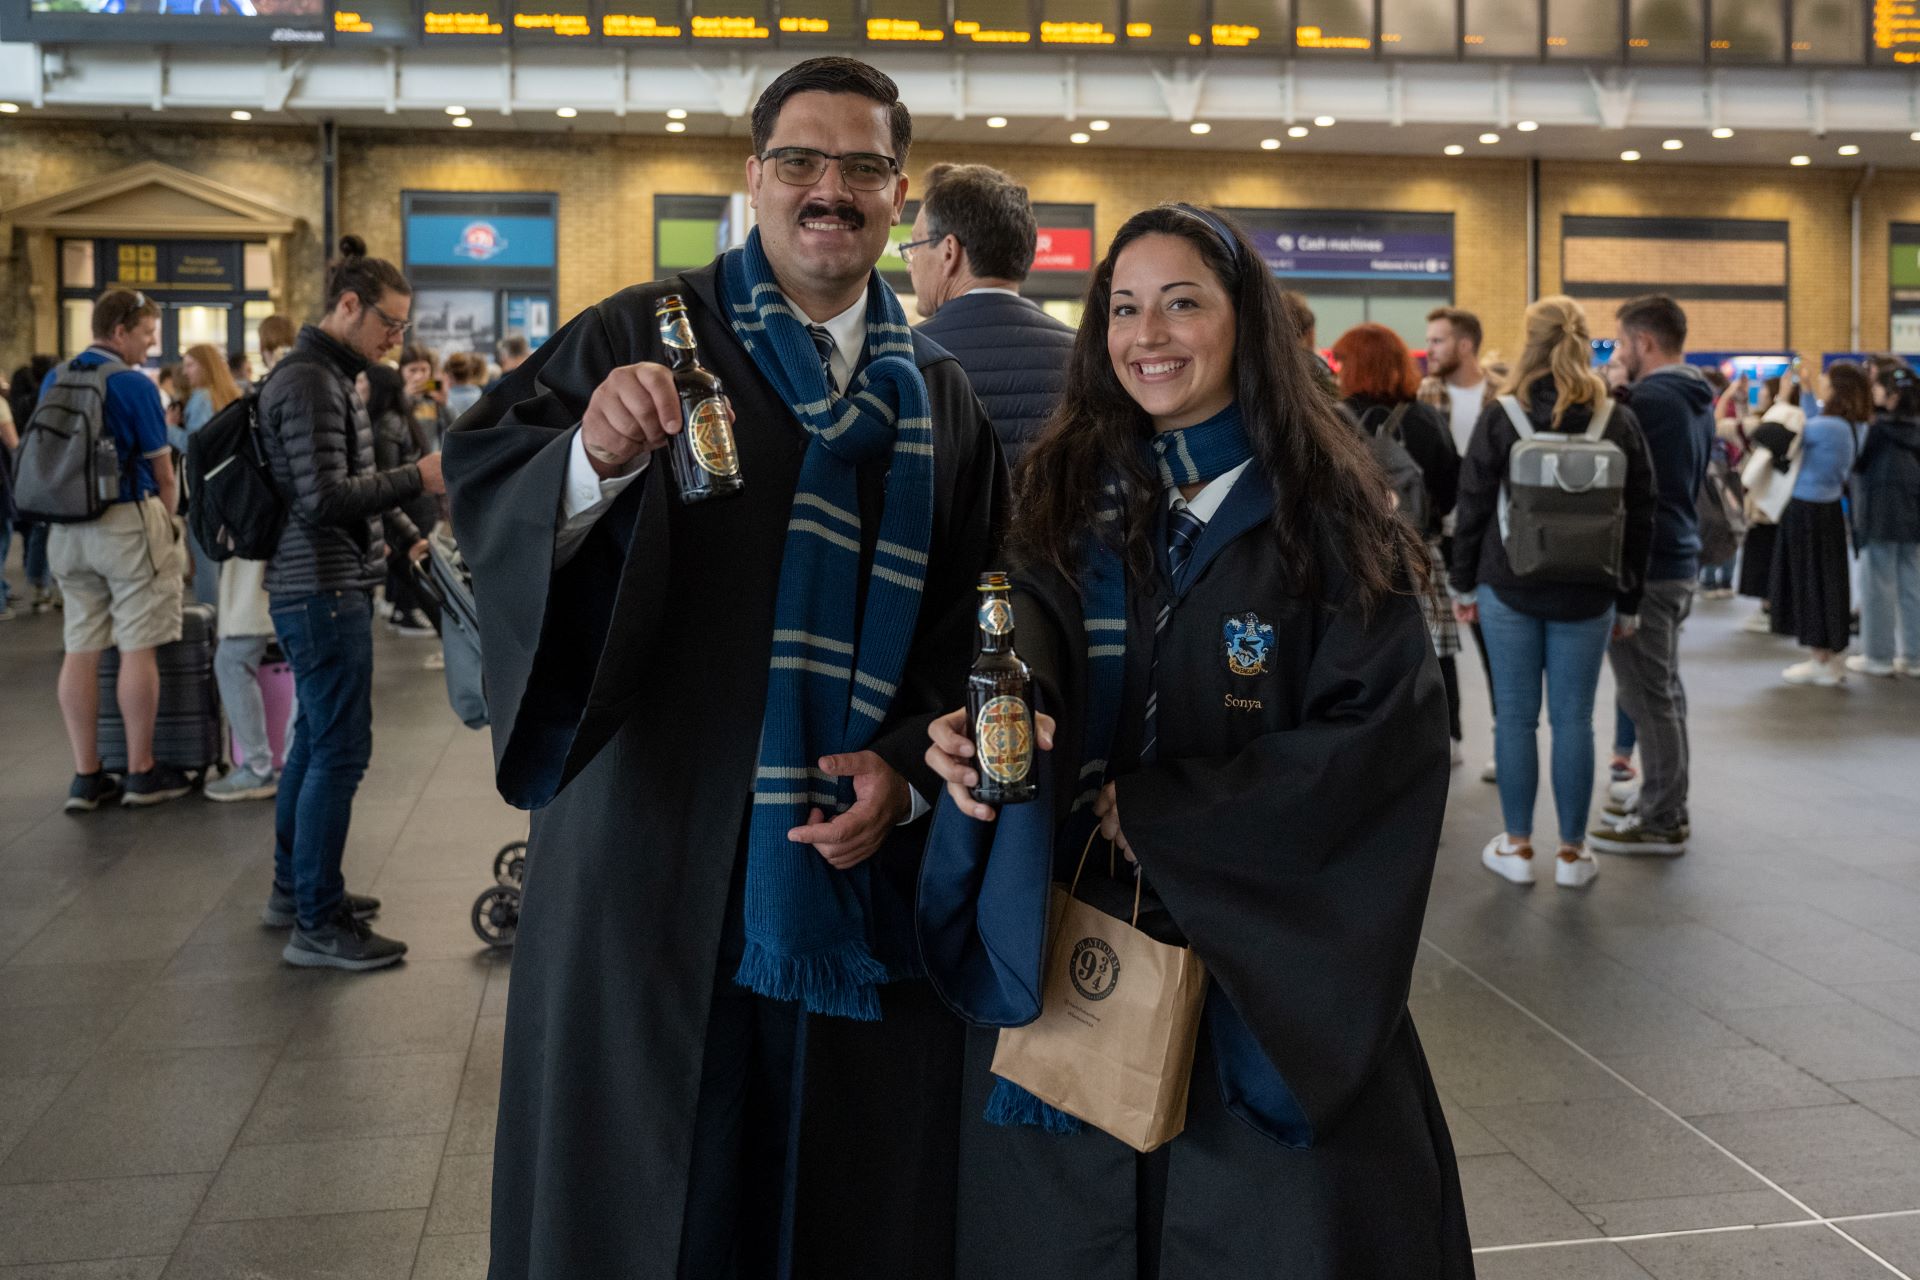 LEGO Harry Potter promotion at King's Cross station